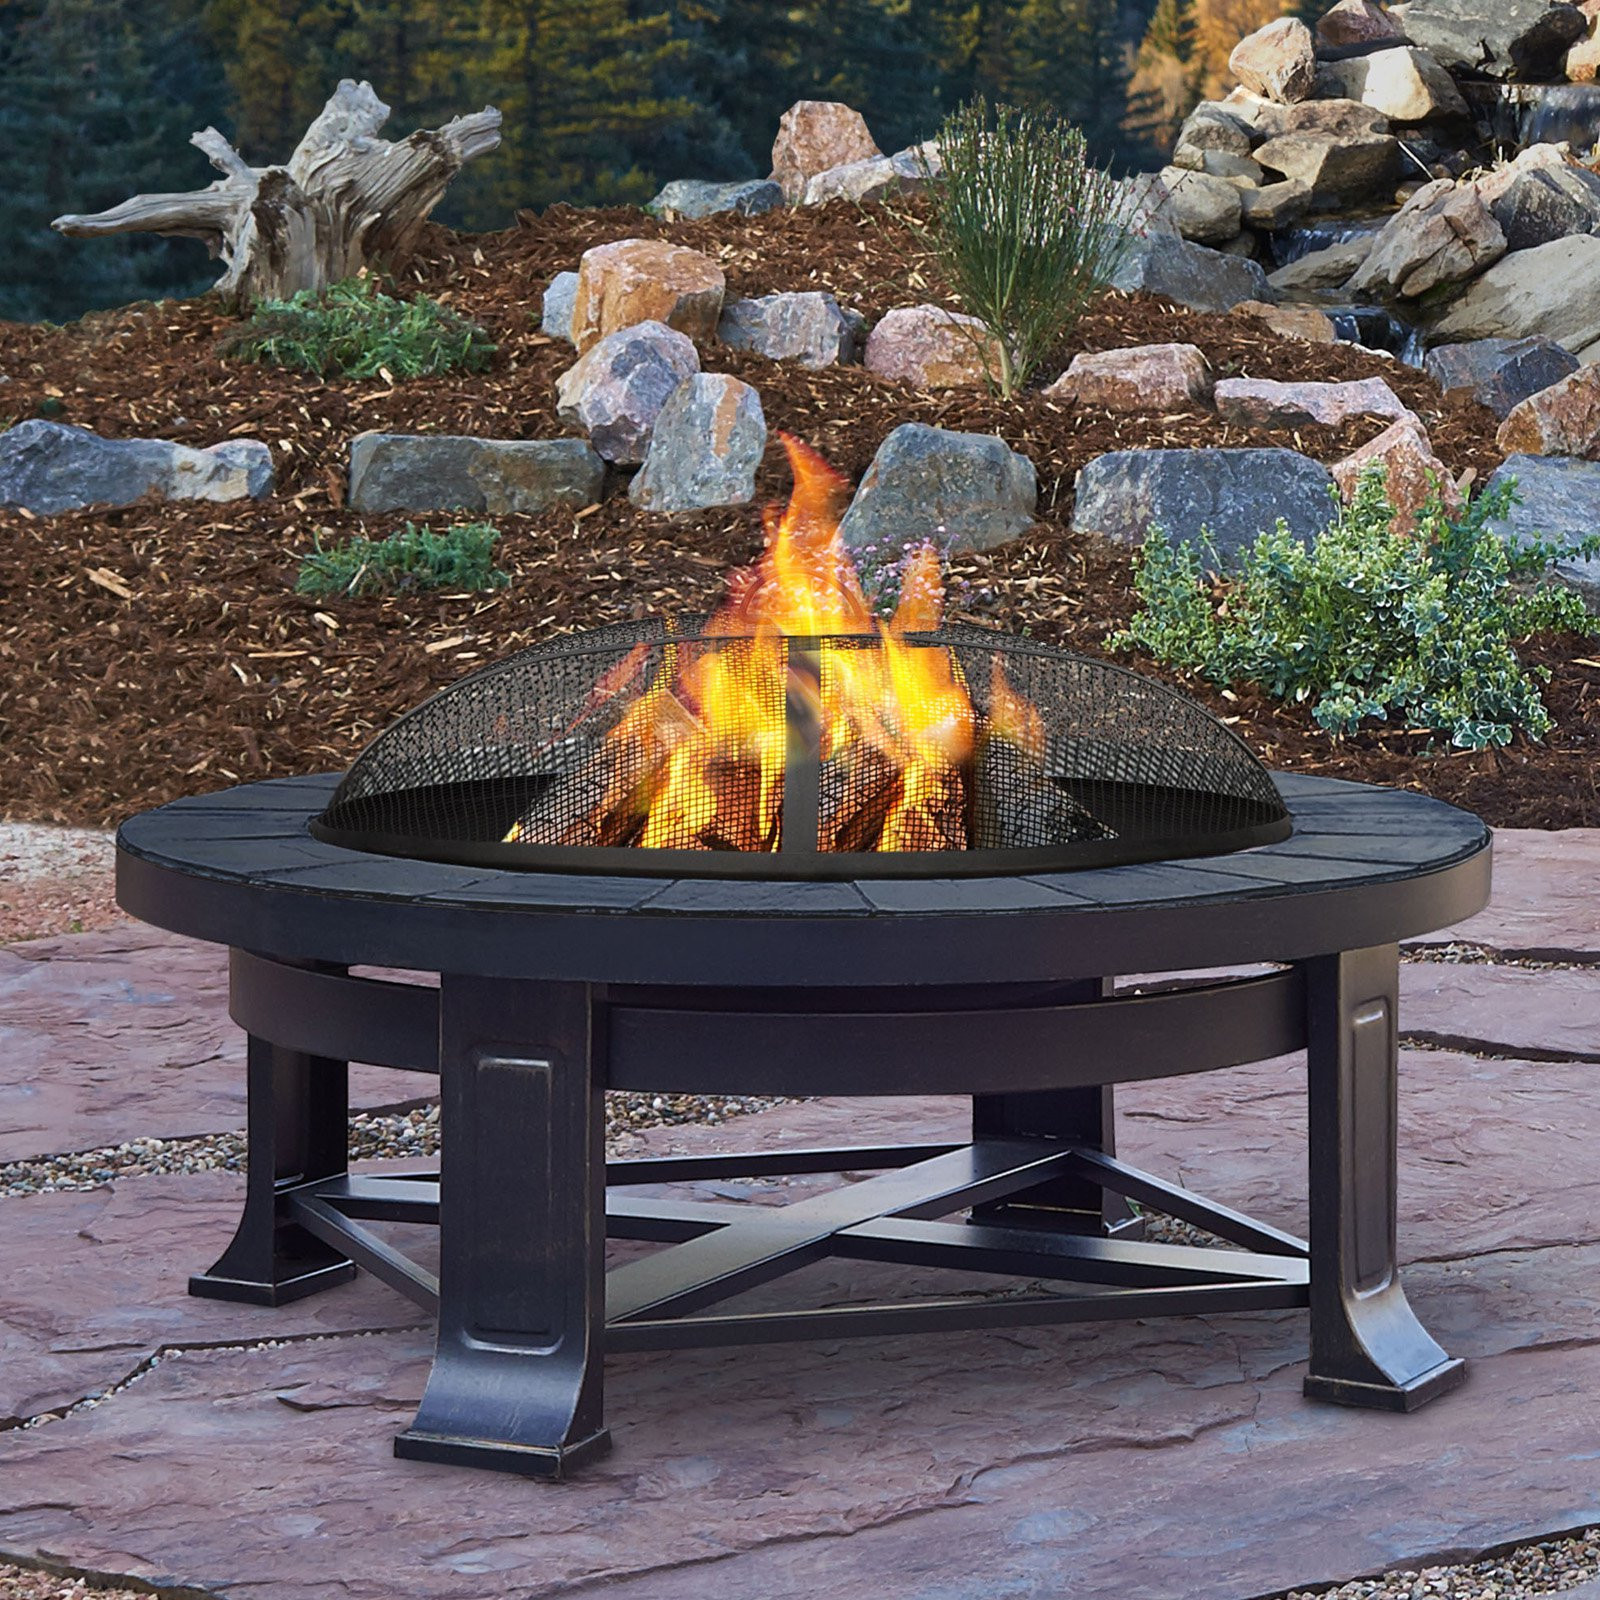 Fireplace Fire Pit
 Real Flame Edwards Wood Burning Fire Pit Fire Pits at